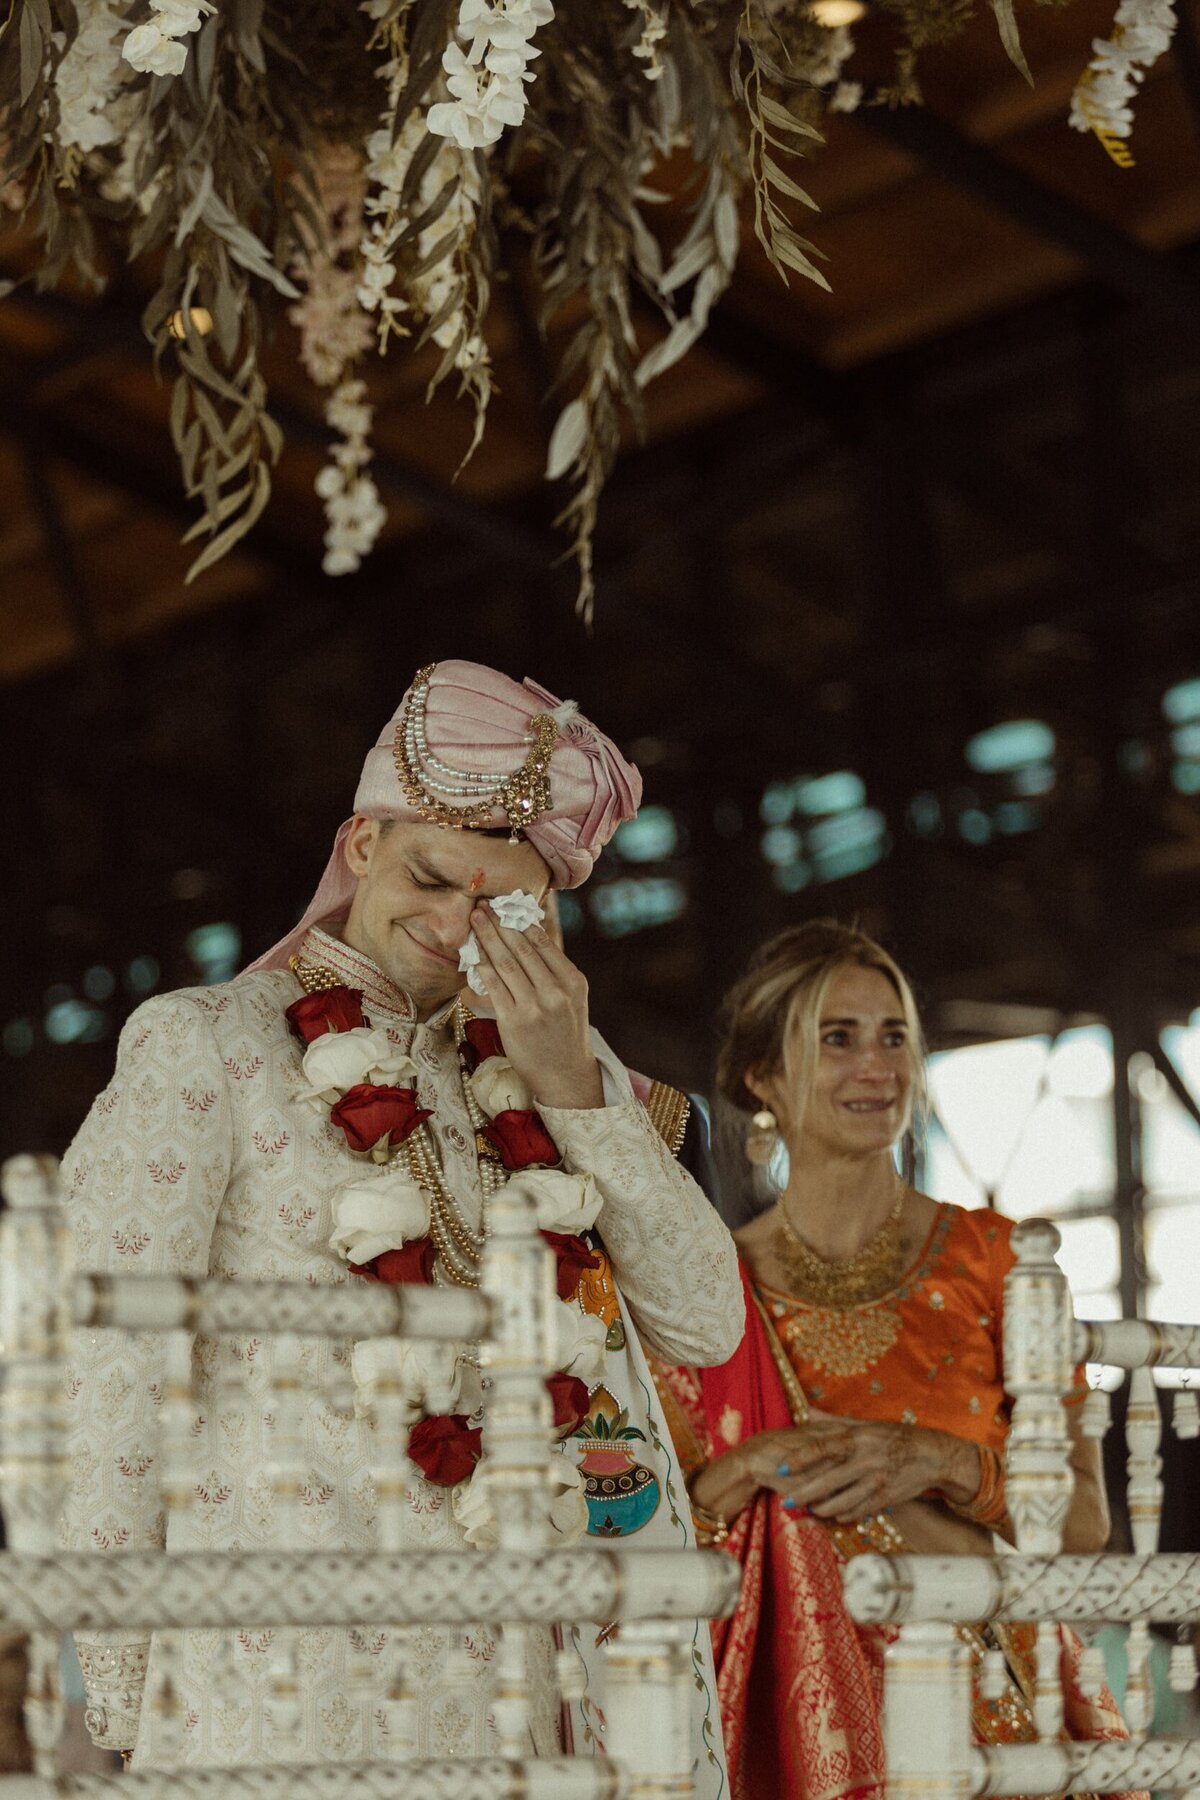 A groom crying as he watches his fiance walk to him at their South Asian wedding ceremony.